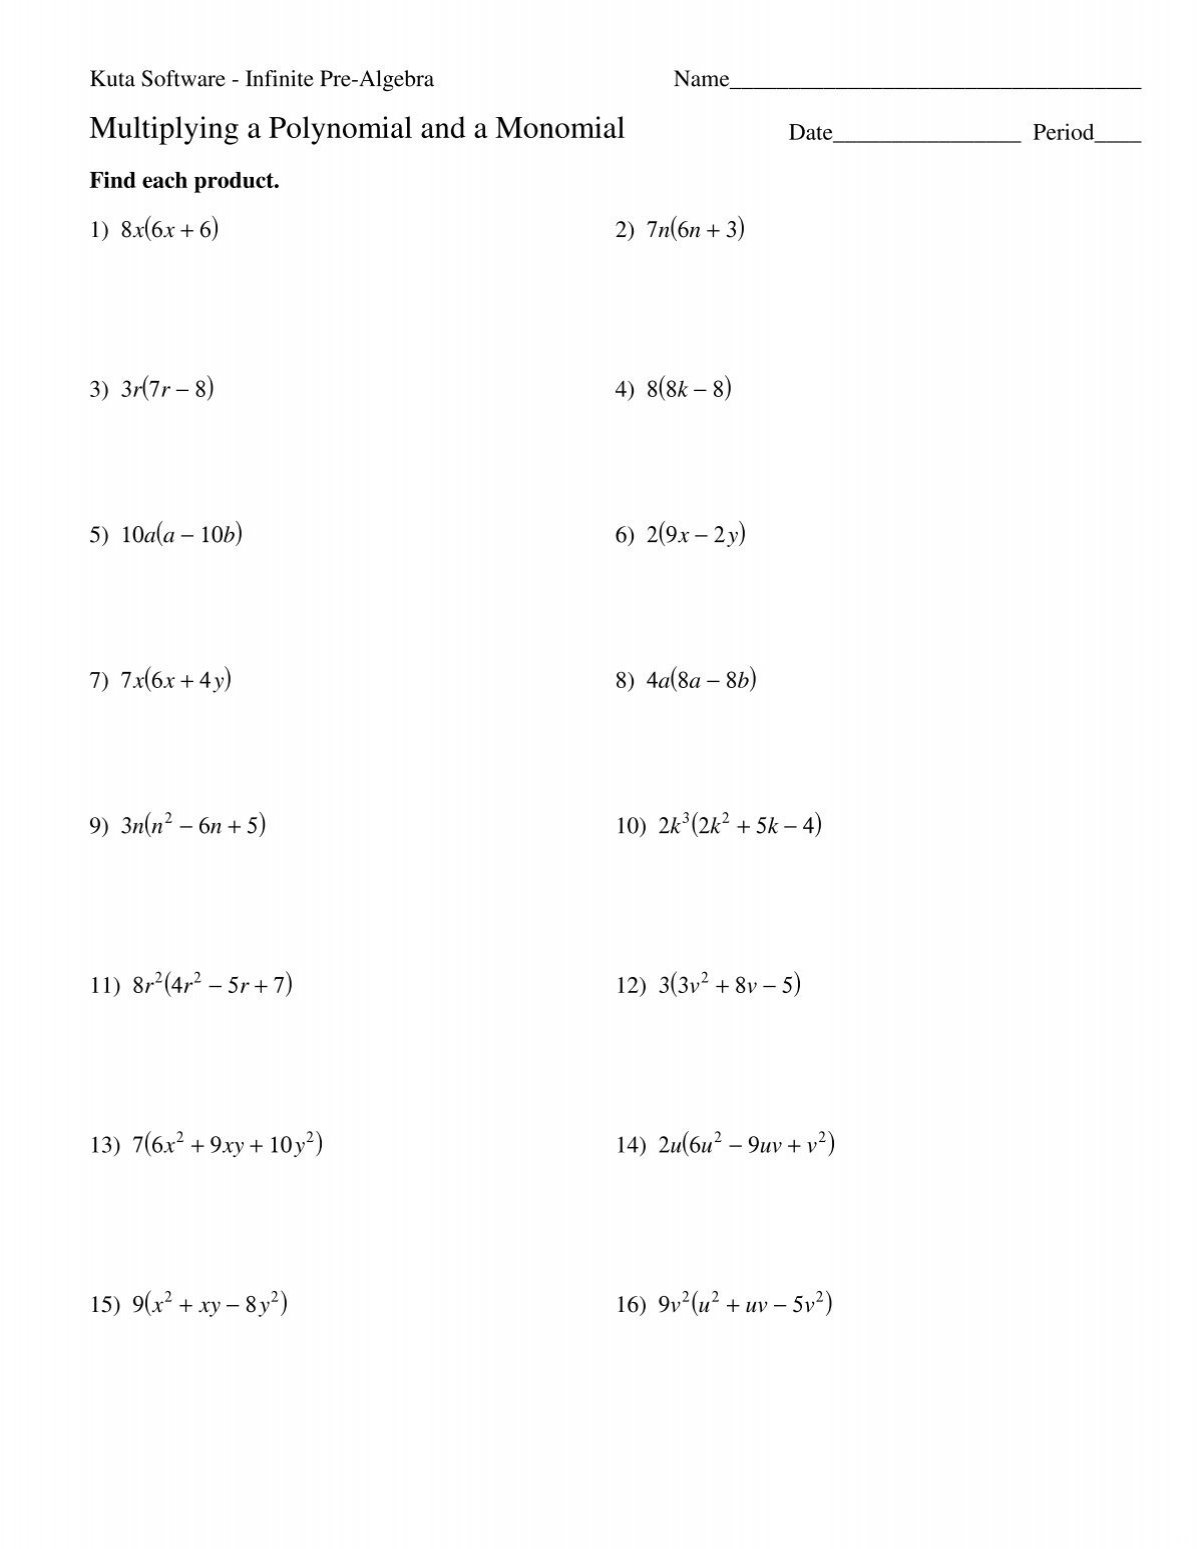 Multiplying a Polynomial and a Monomial Worksheets Kuta Software